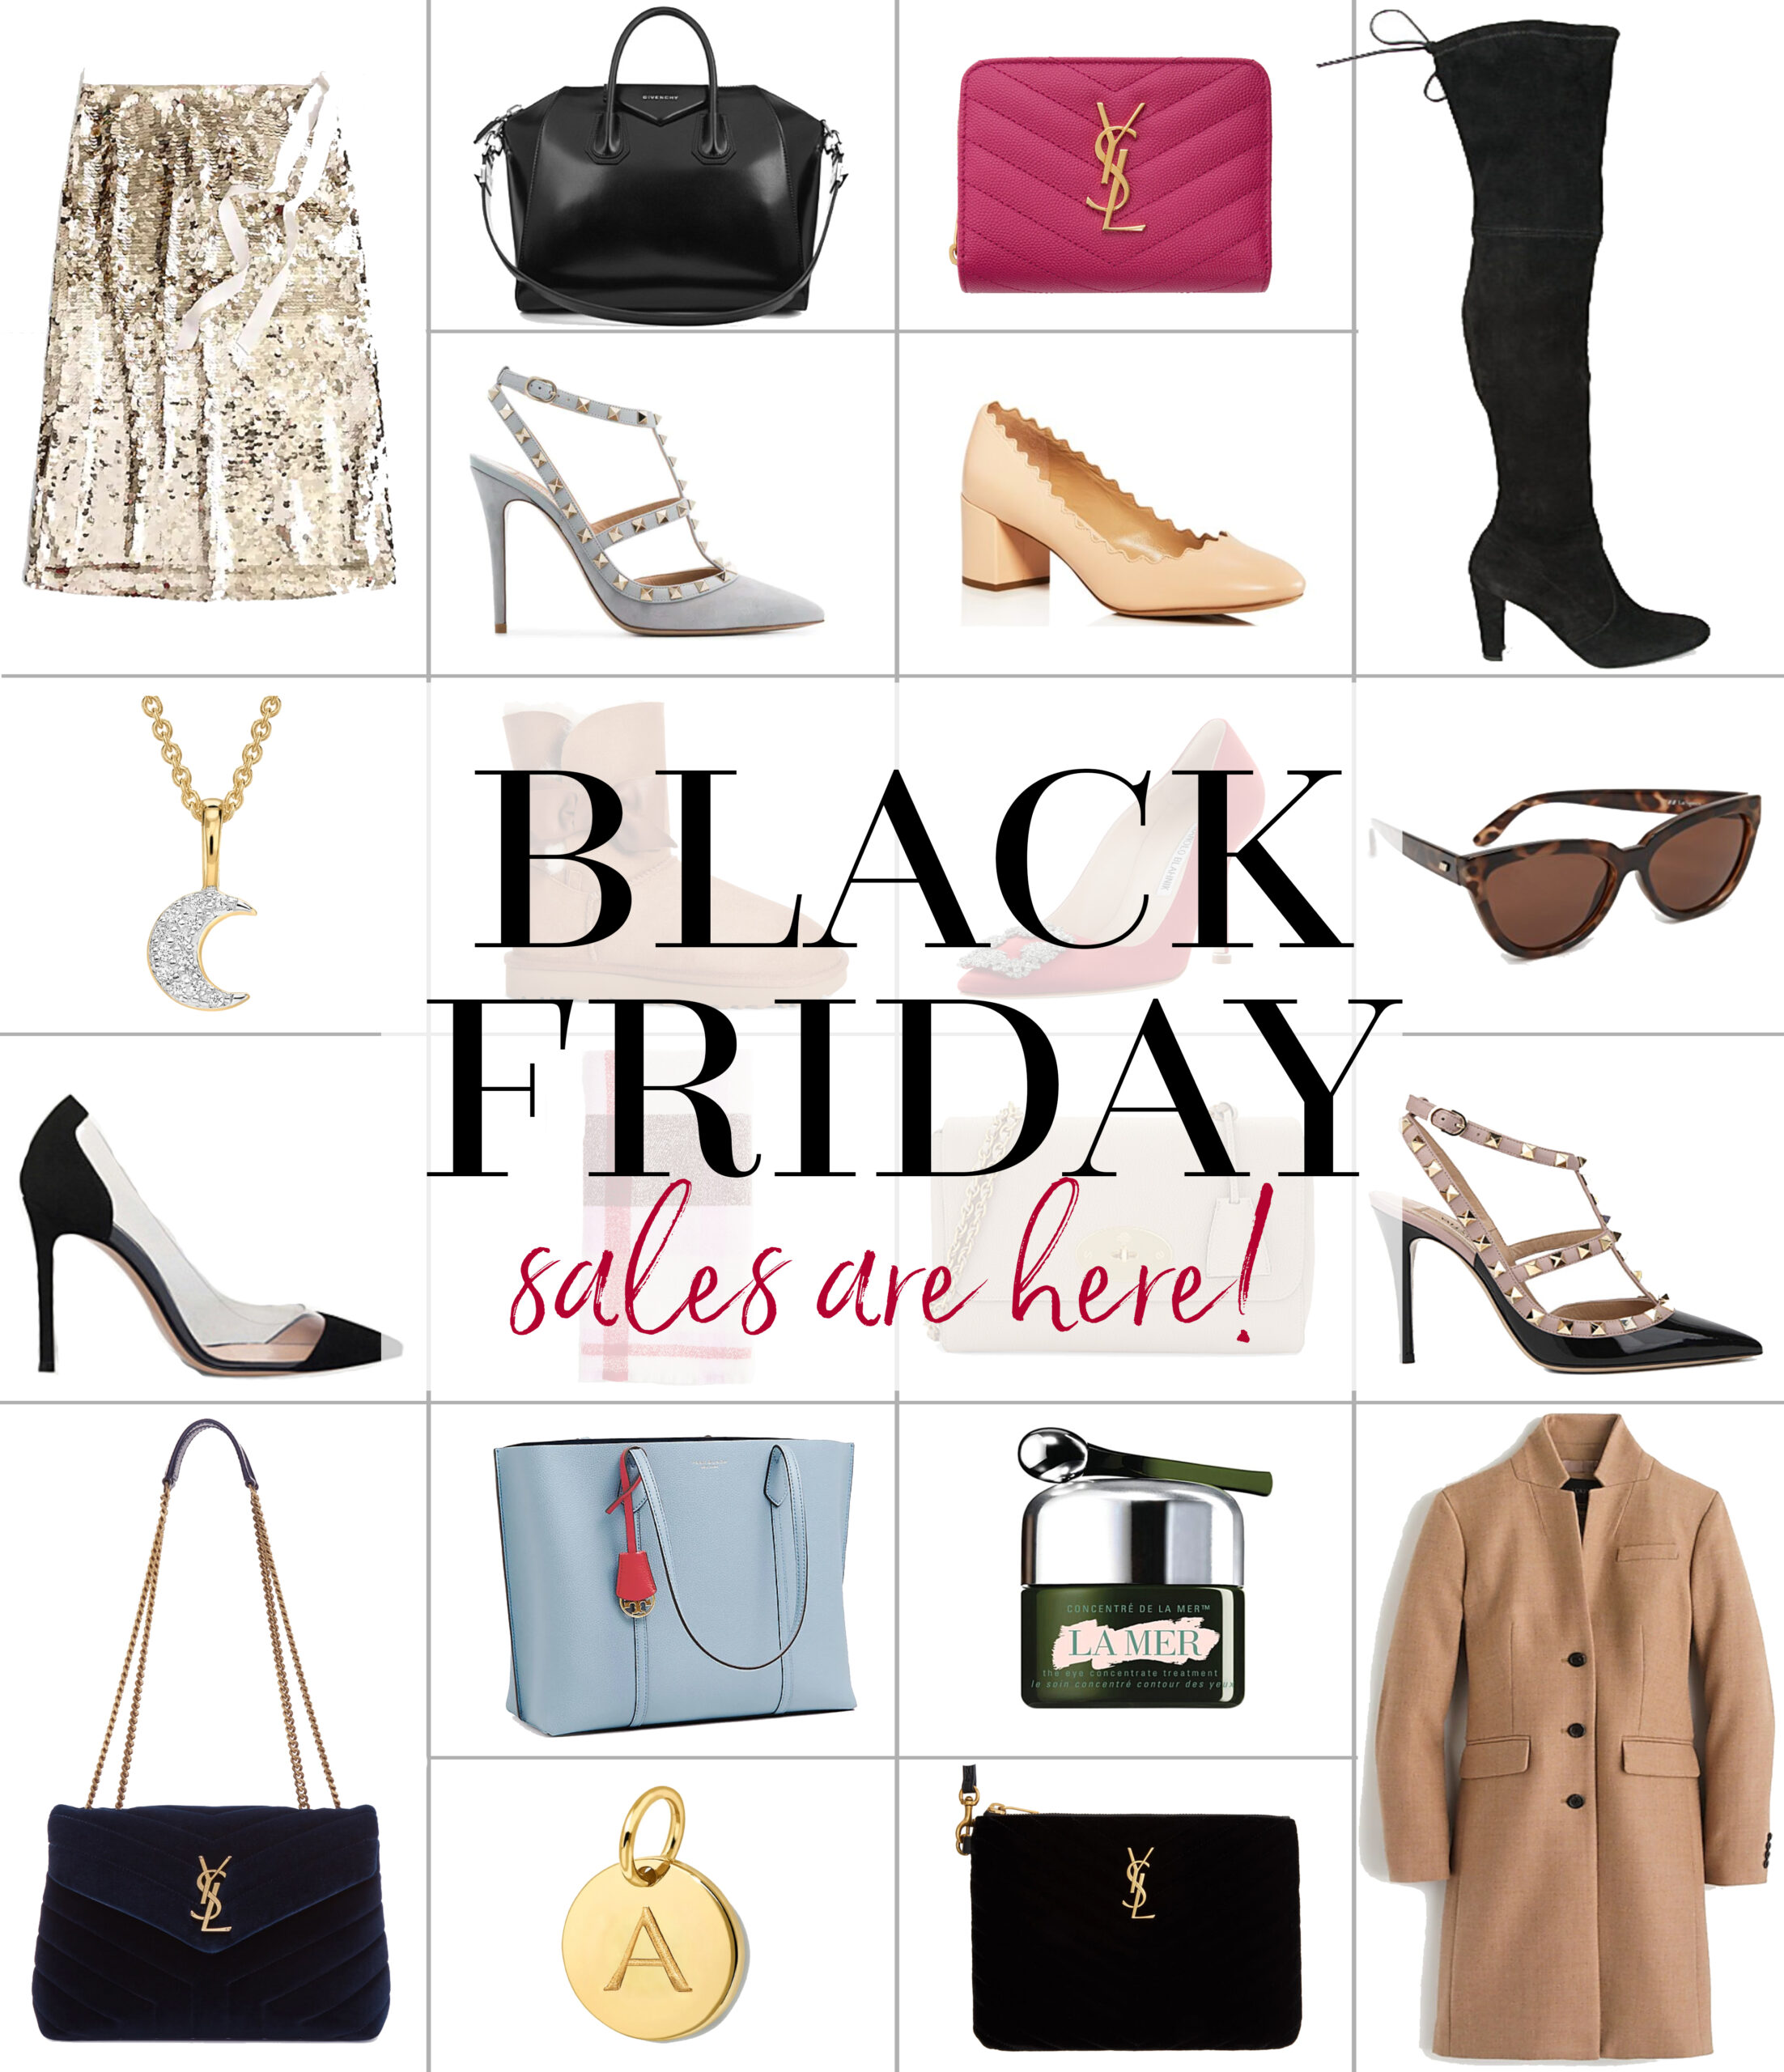 Black Friday Sales Have Arrived! - Chase Amie